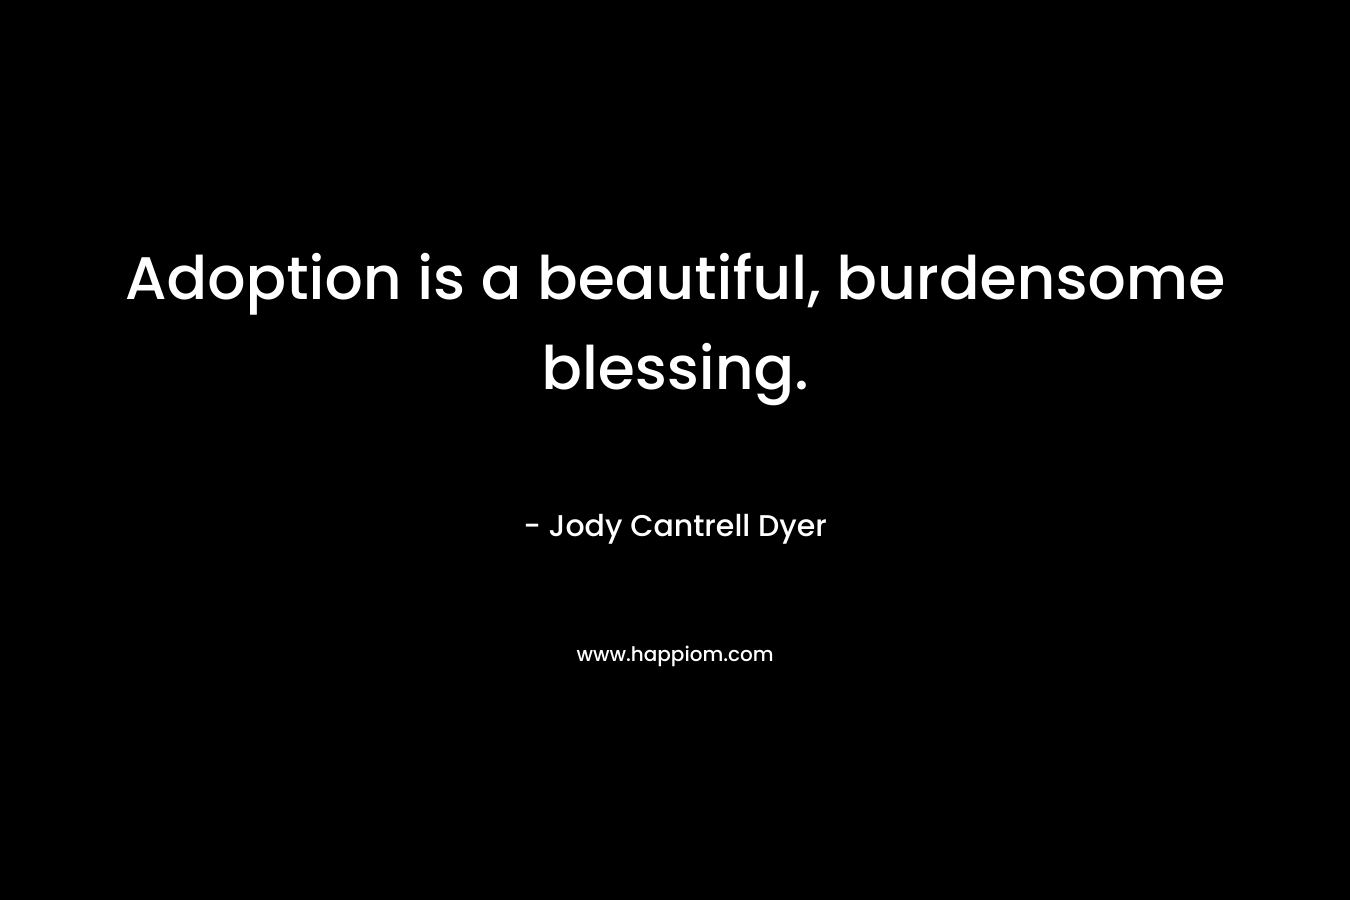 Adoption is a beautiful, burdensome blessing. – Jody Cantrell Dyer